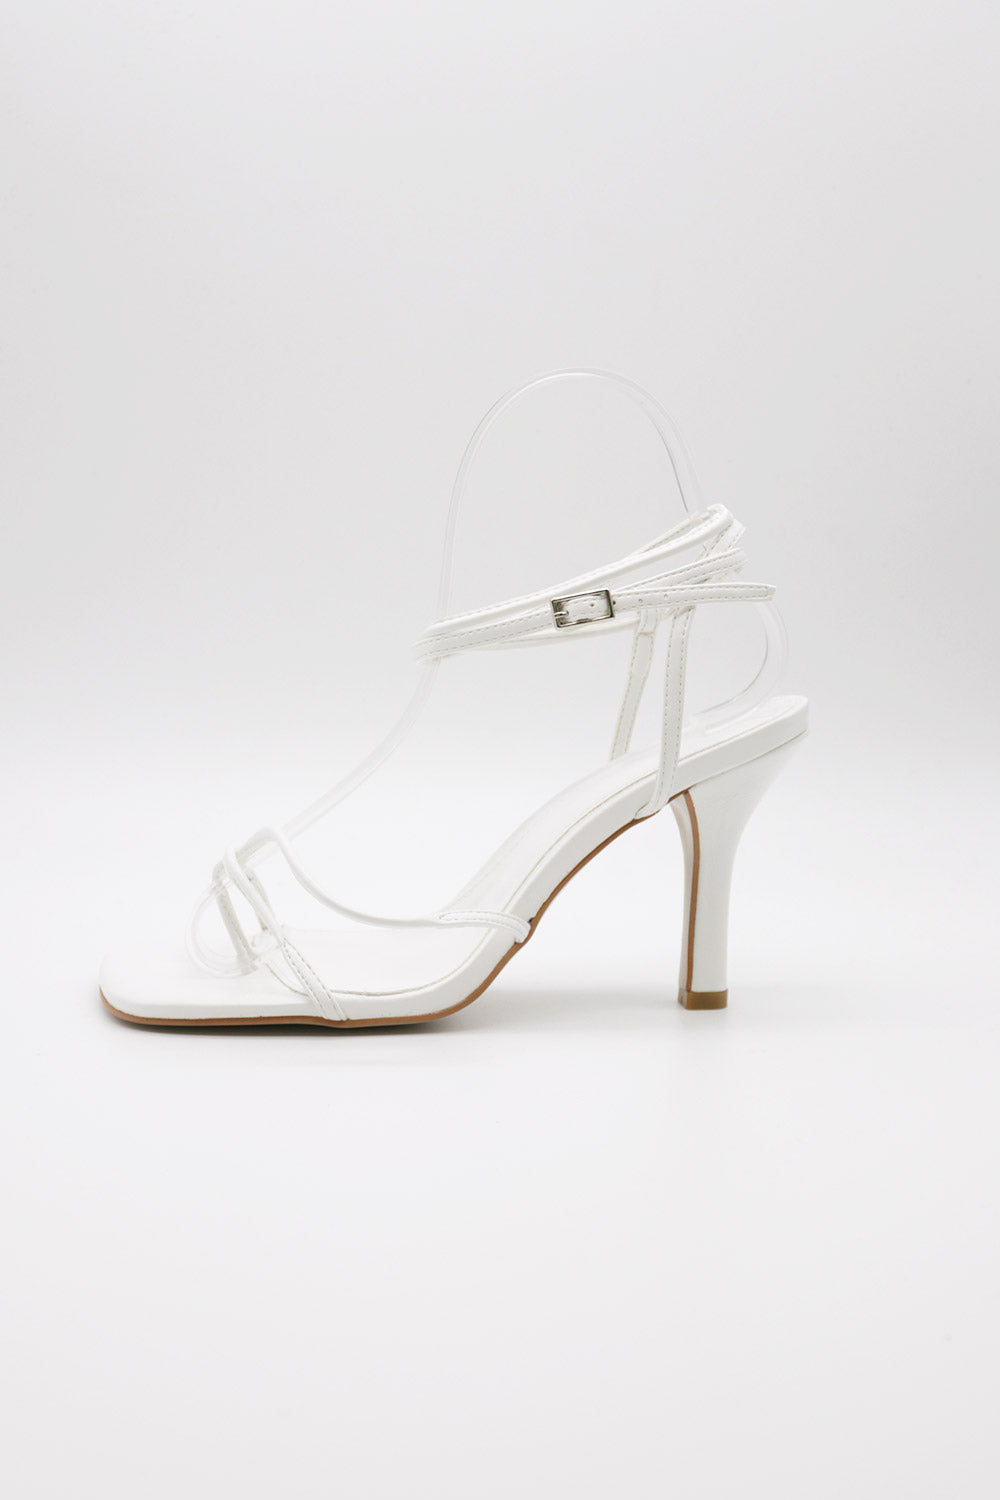 storets.com Strappy Heeled Sandals